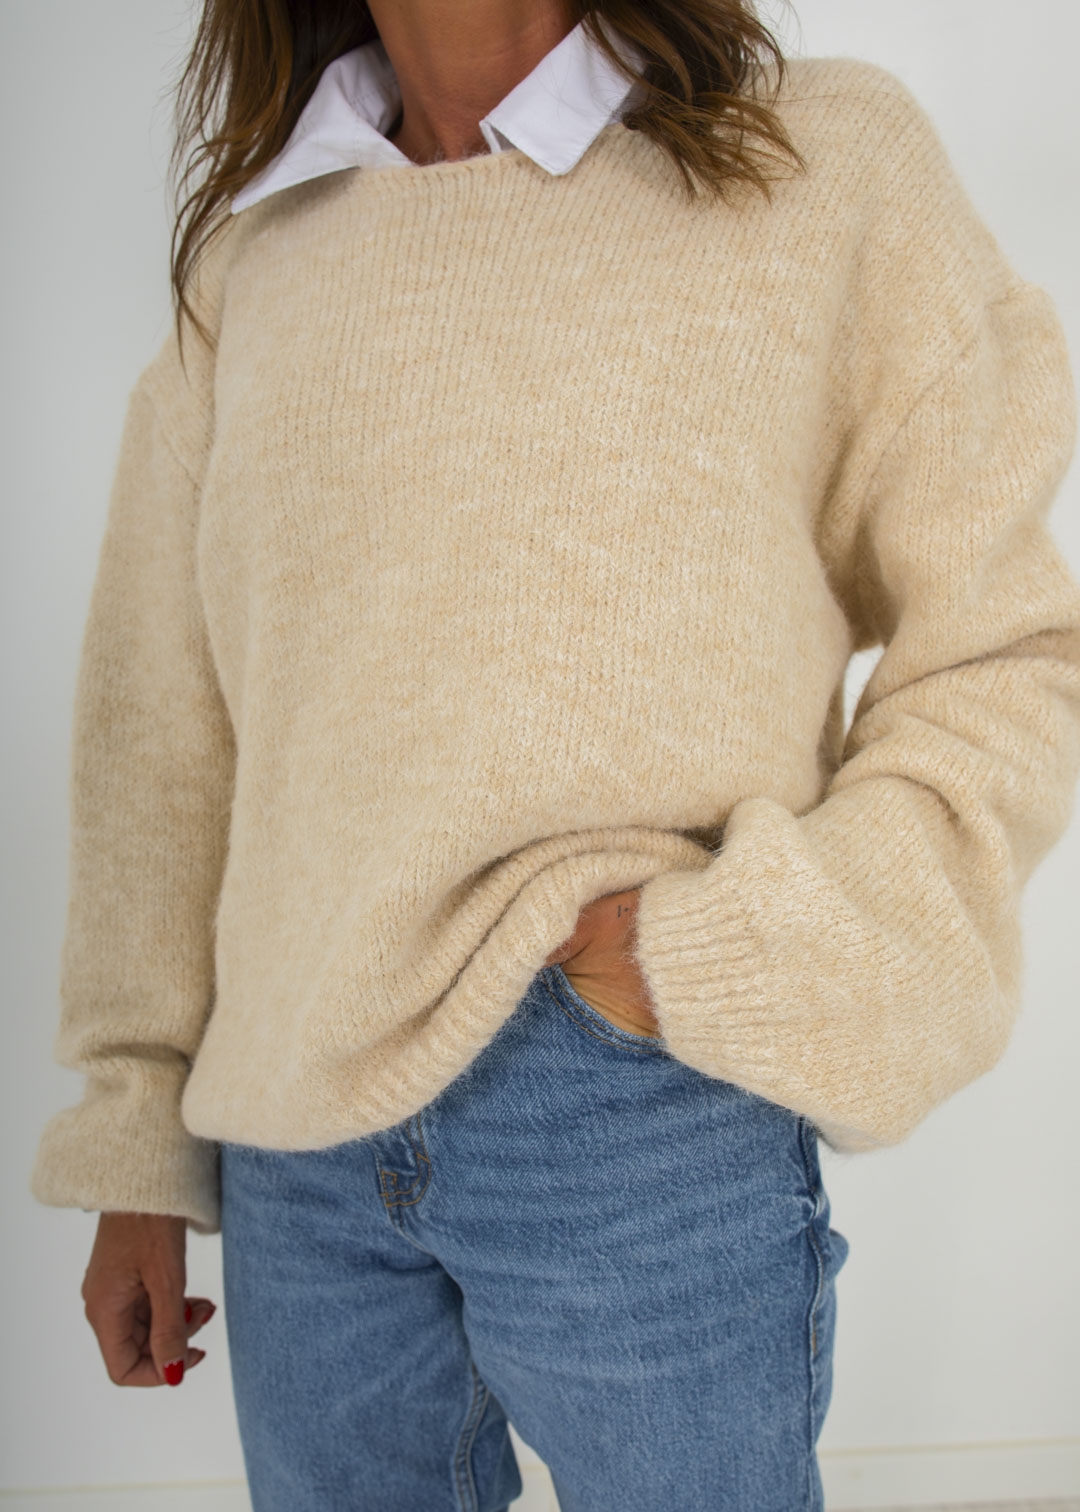 BEIGE SWEATER WITH BOWS